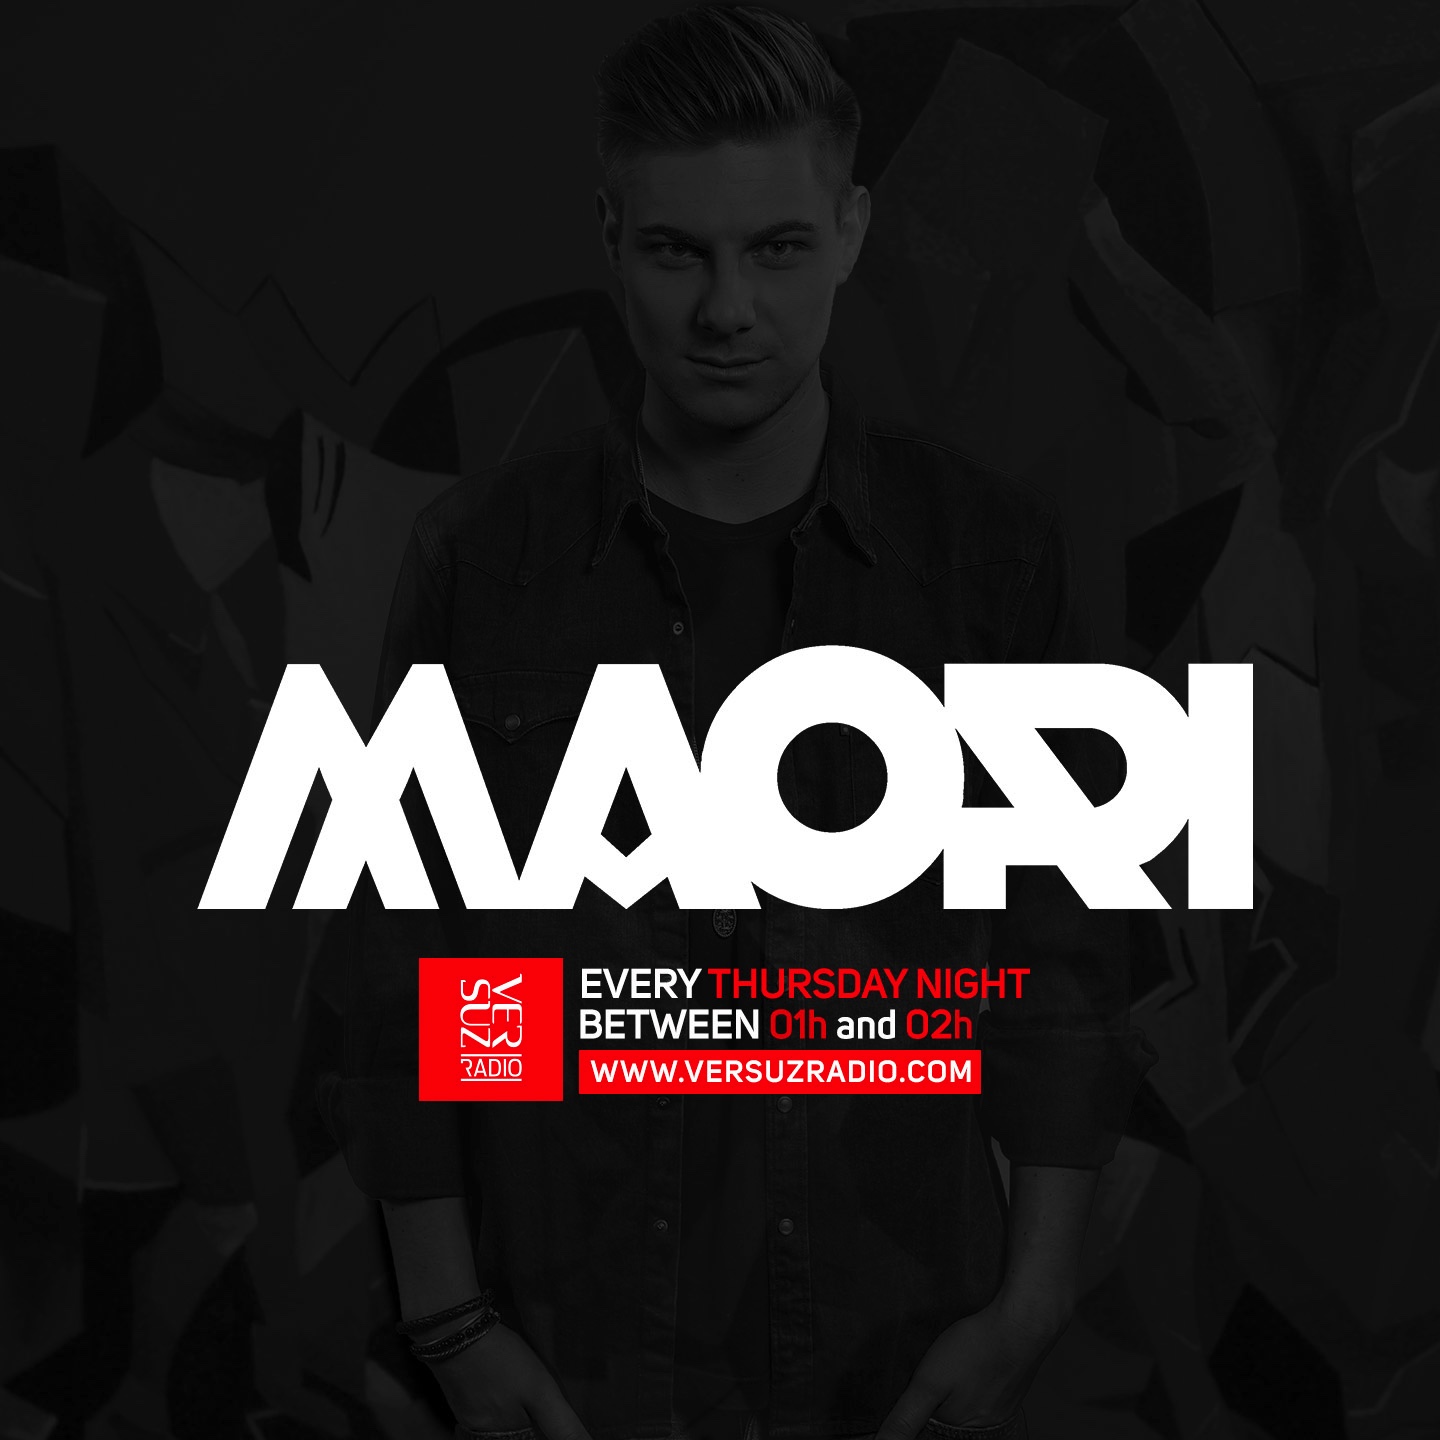 Clubhouse Radio by Maori - Episode #001